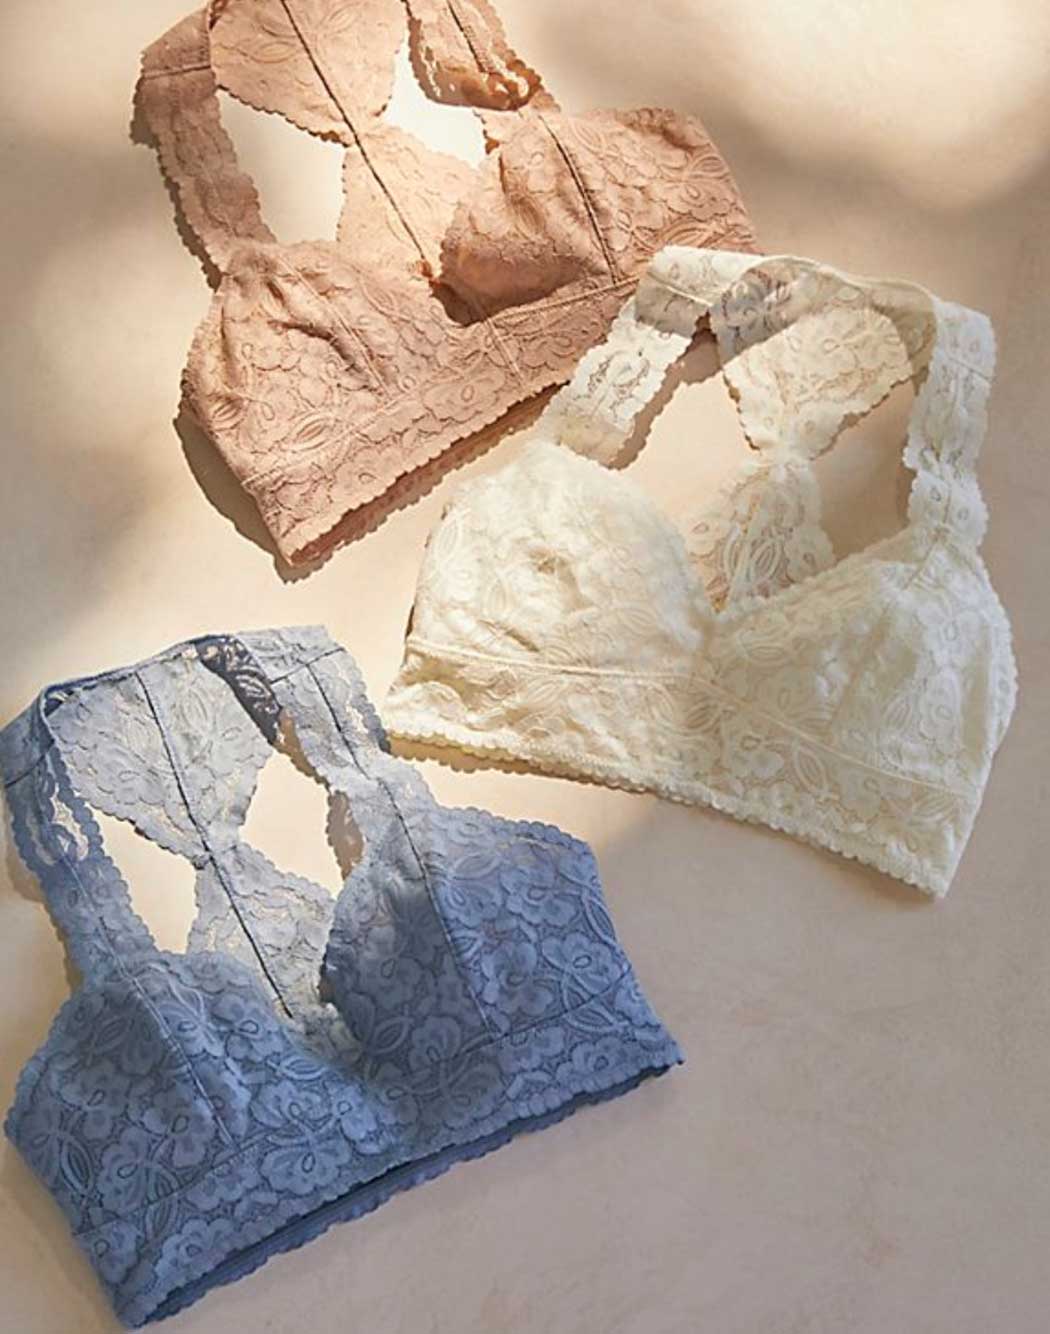 These lingerie will make any mom feel pretty and feminine after giving birth